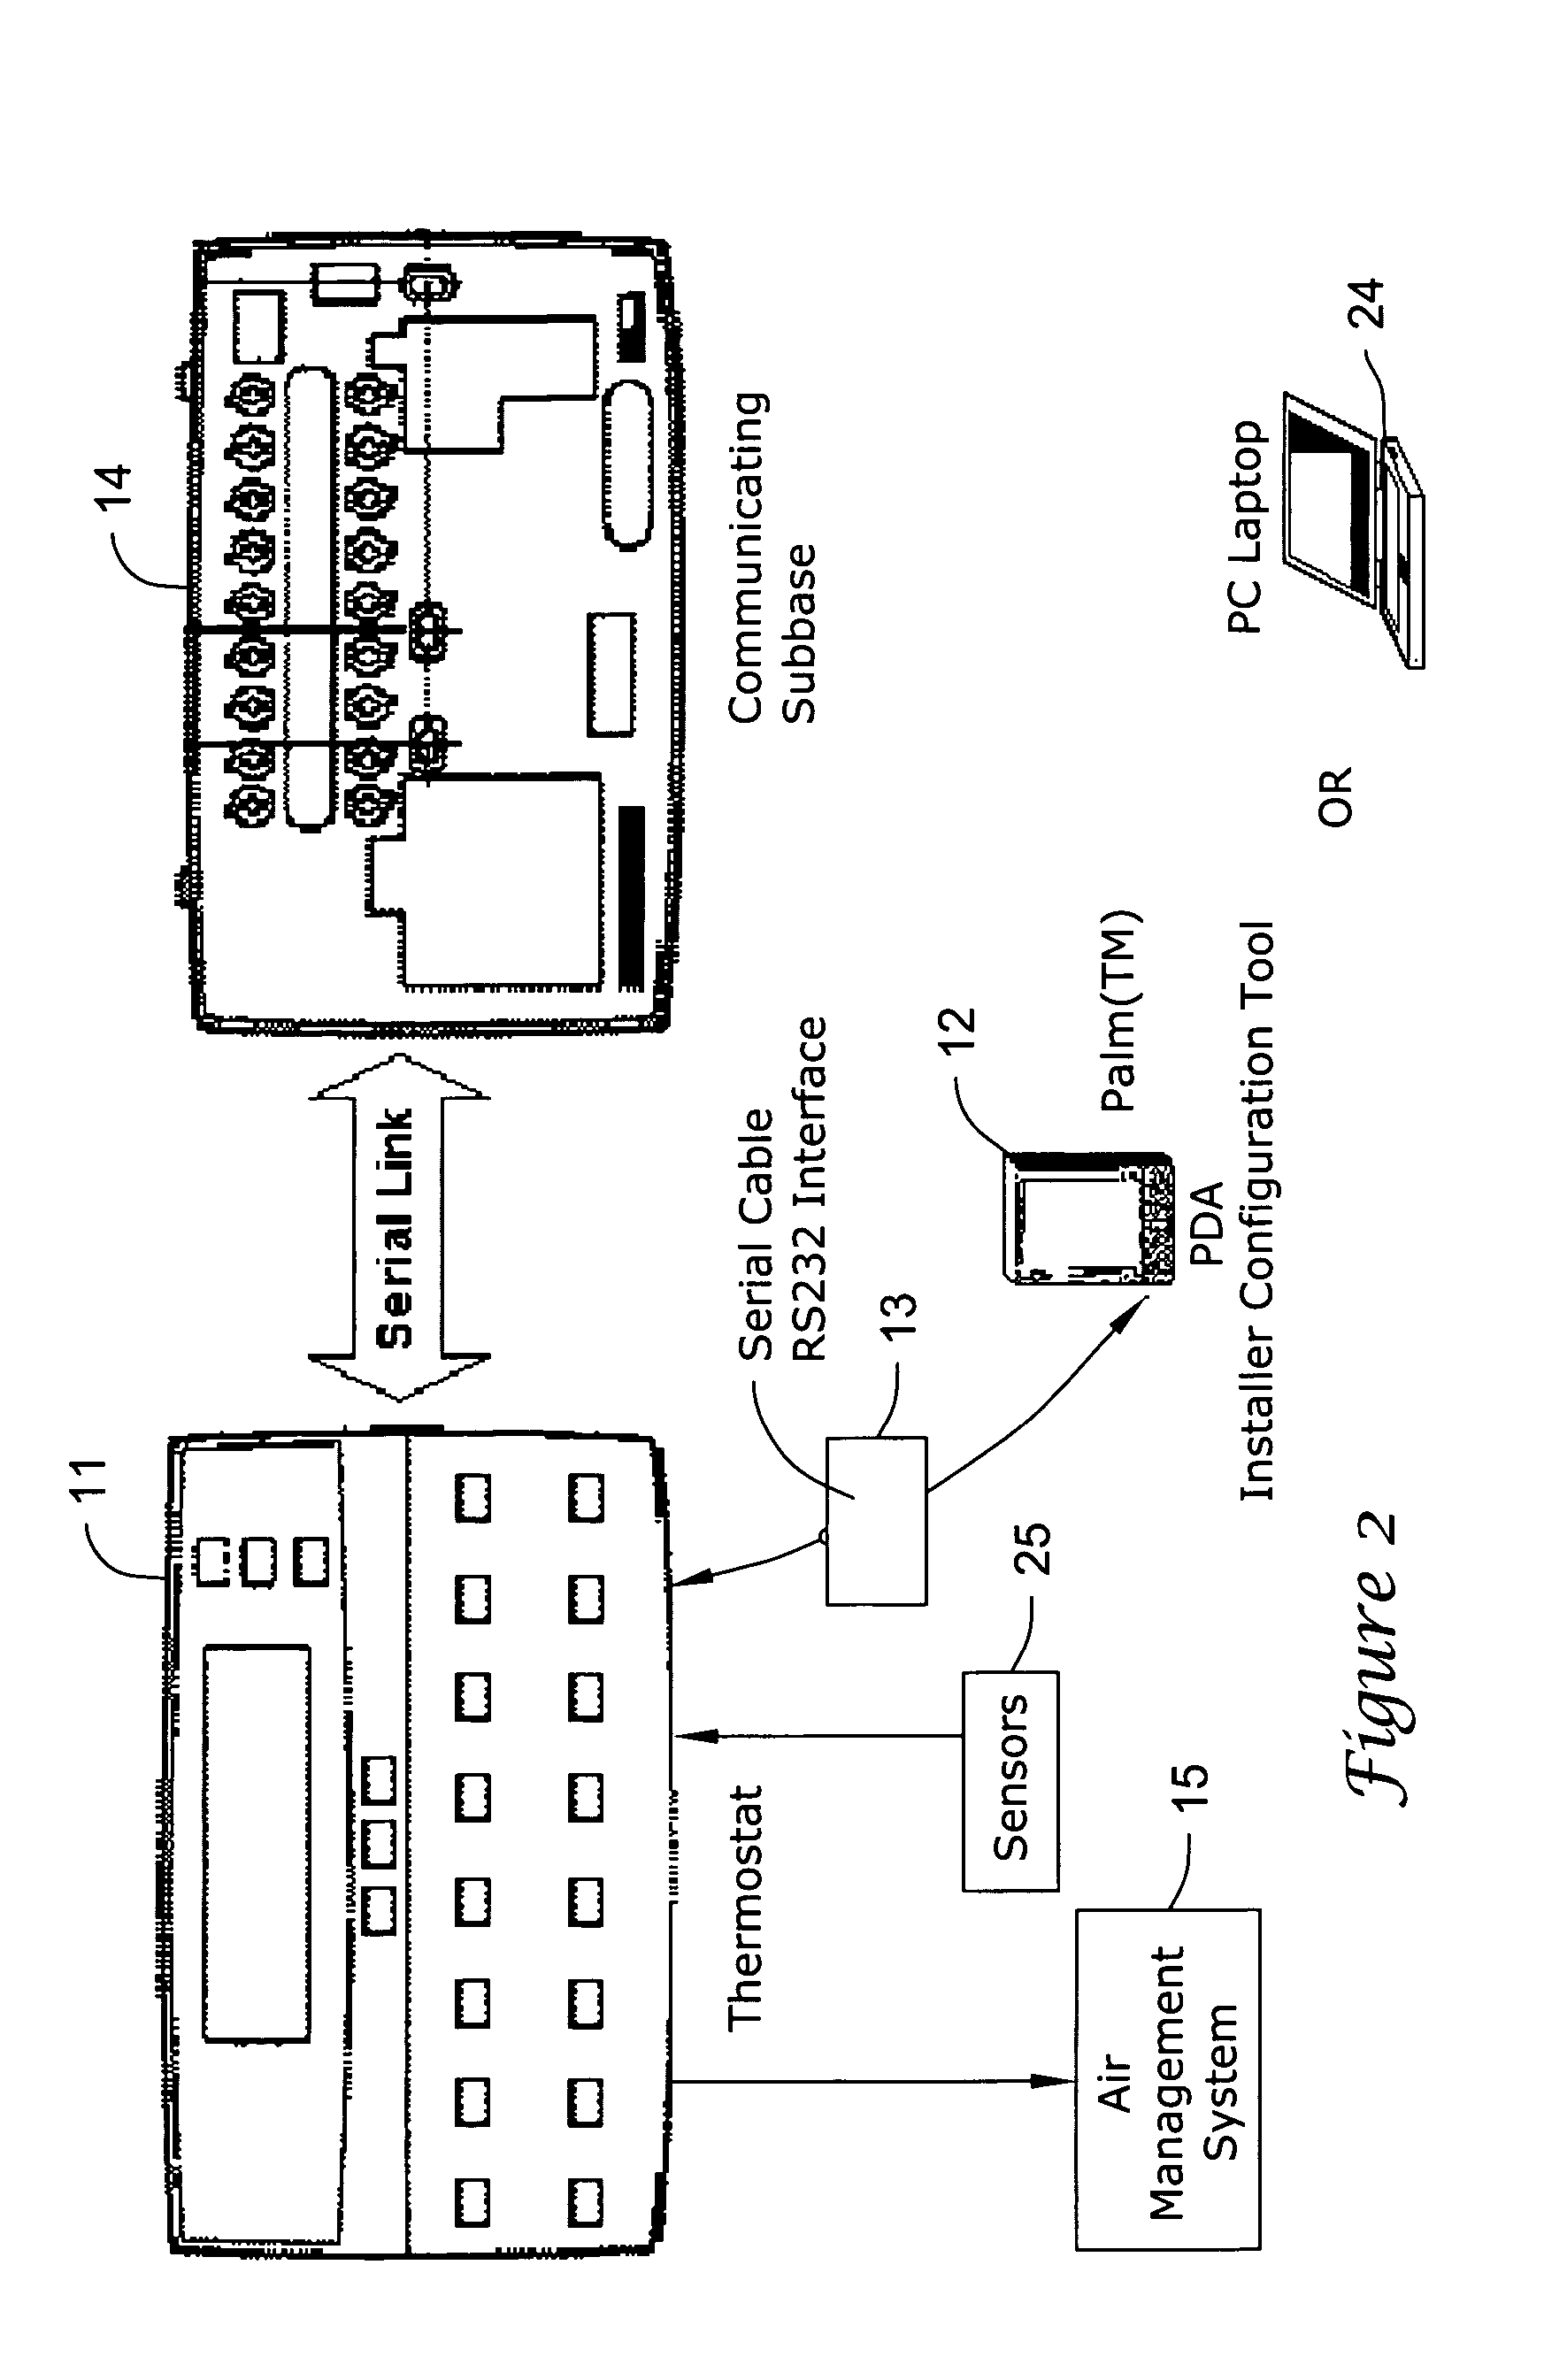 Thermostat having modulated and non-modulated provisions